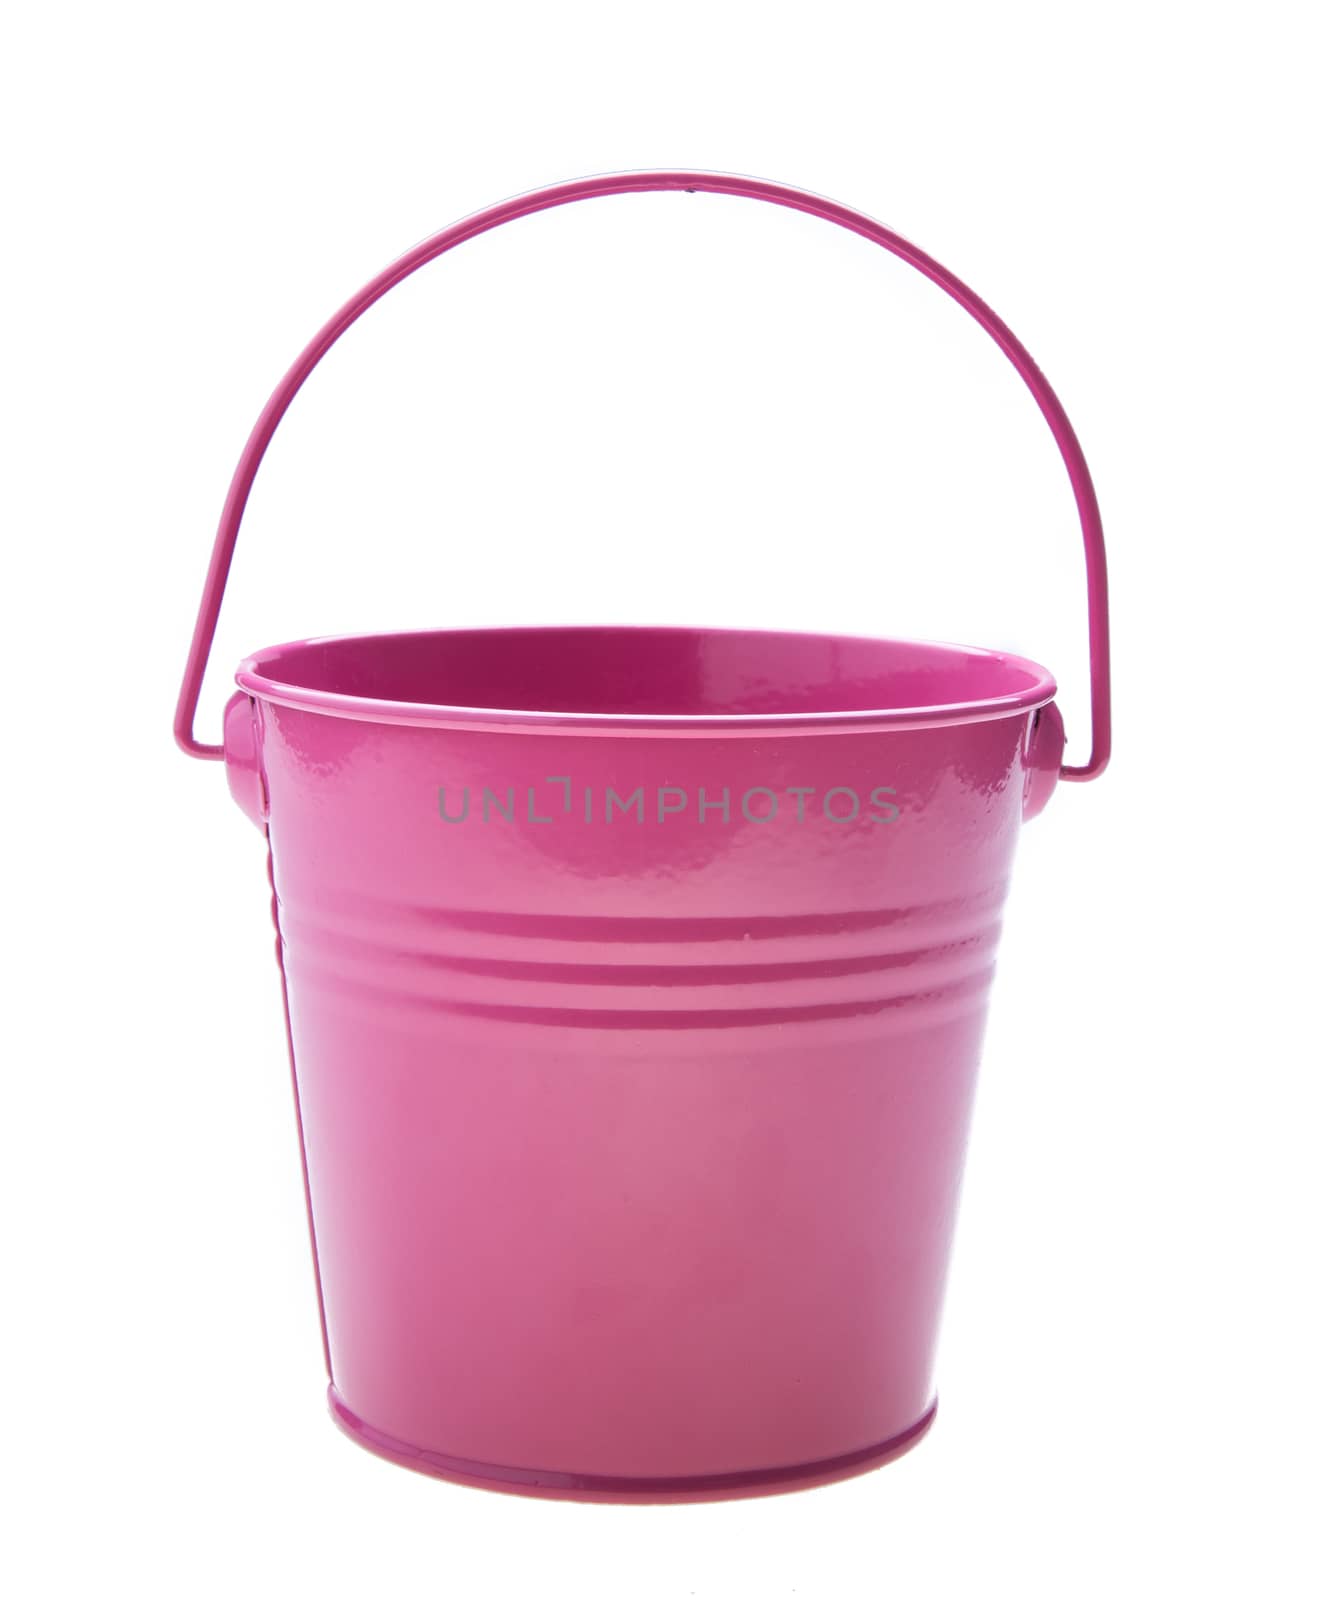 empty bucket by tehcheesiong